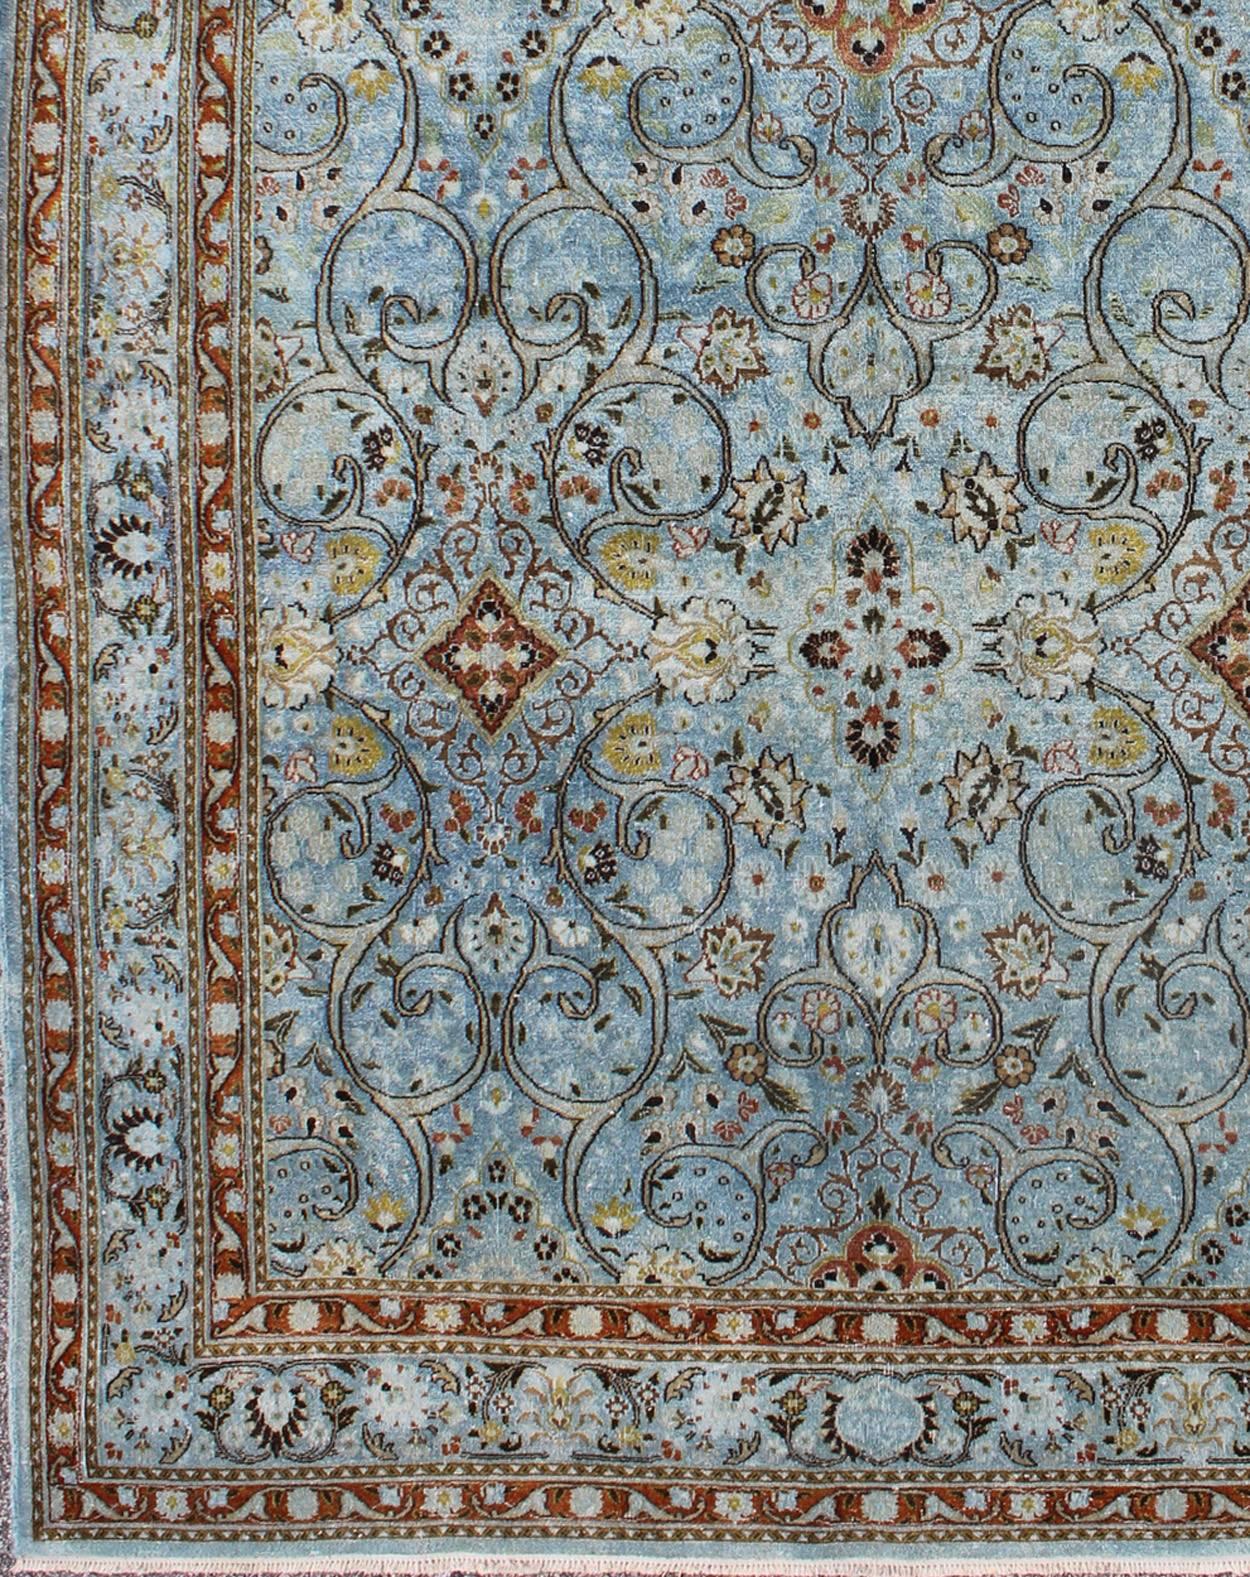 Ice blue ornate sweeping floral pattern Khorassan Vintage Persian rug, rug 17-1105 , country of origin / type: Iran / Khorassan, circa 1920

This spectacular vintage Persian Khorasan carpet from mid-20th century Iran bears a magnificent splendor